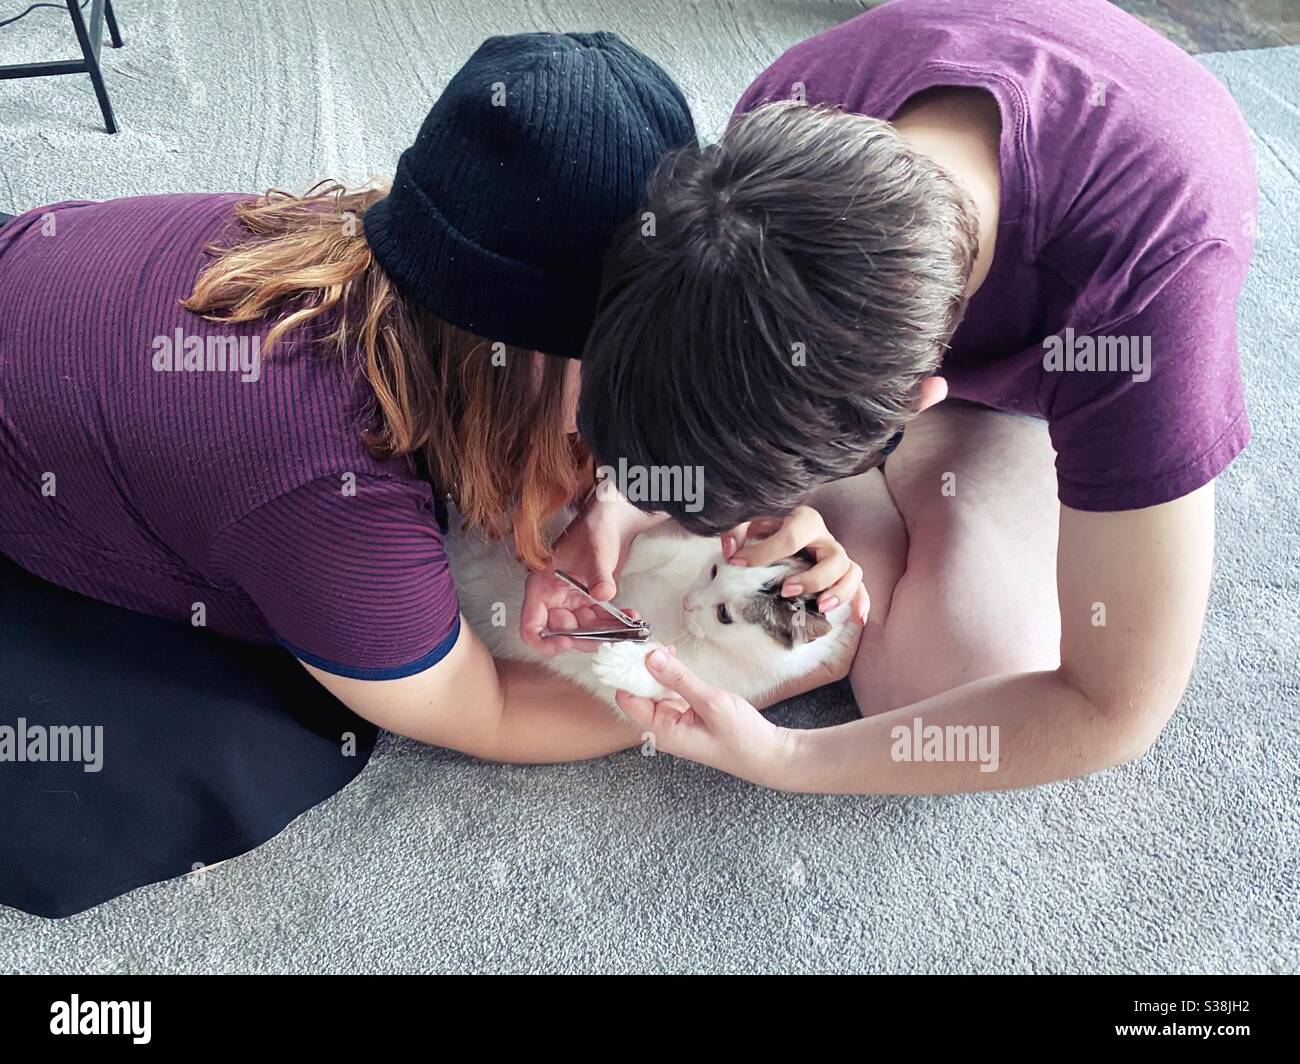 Two people clipping a cat's nails. Stock Photo